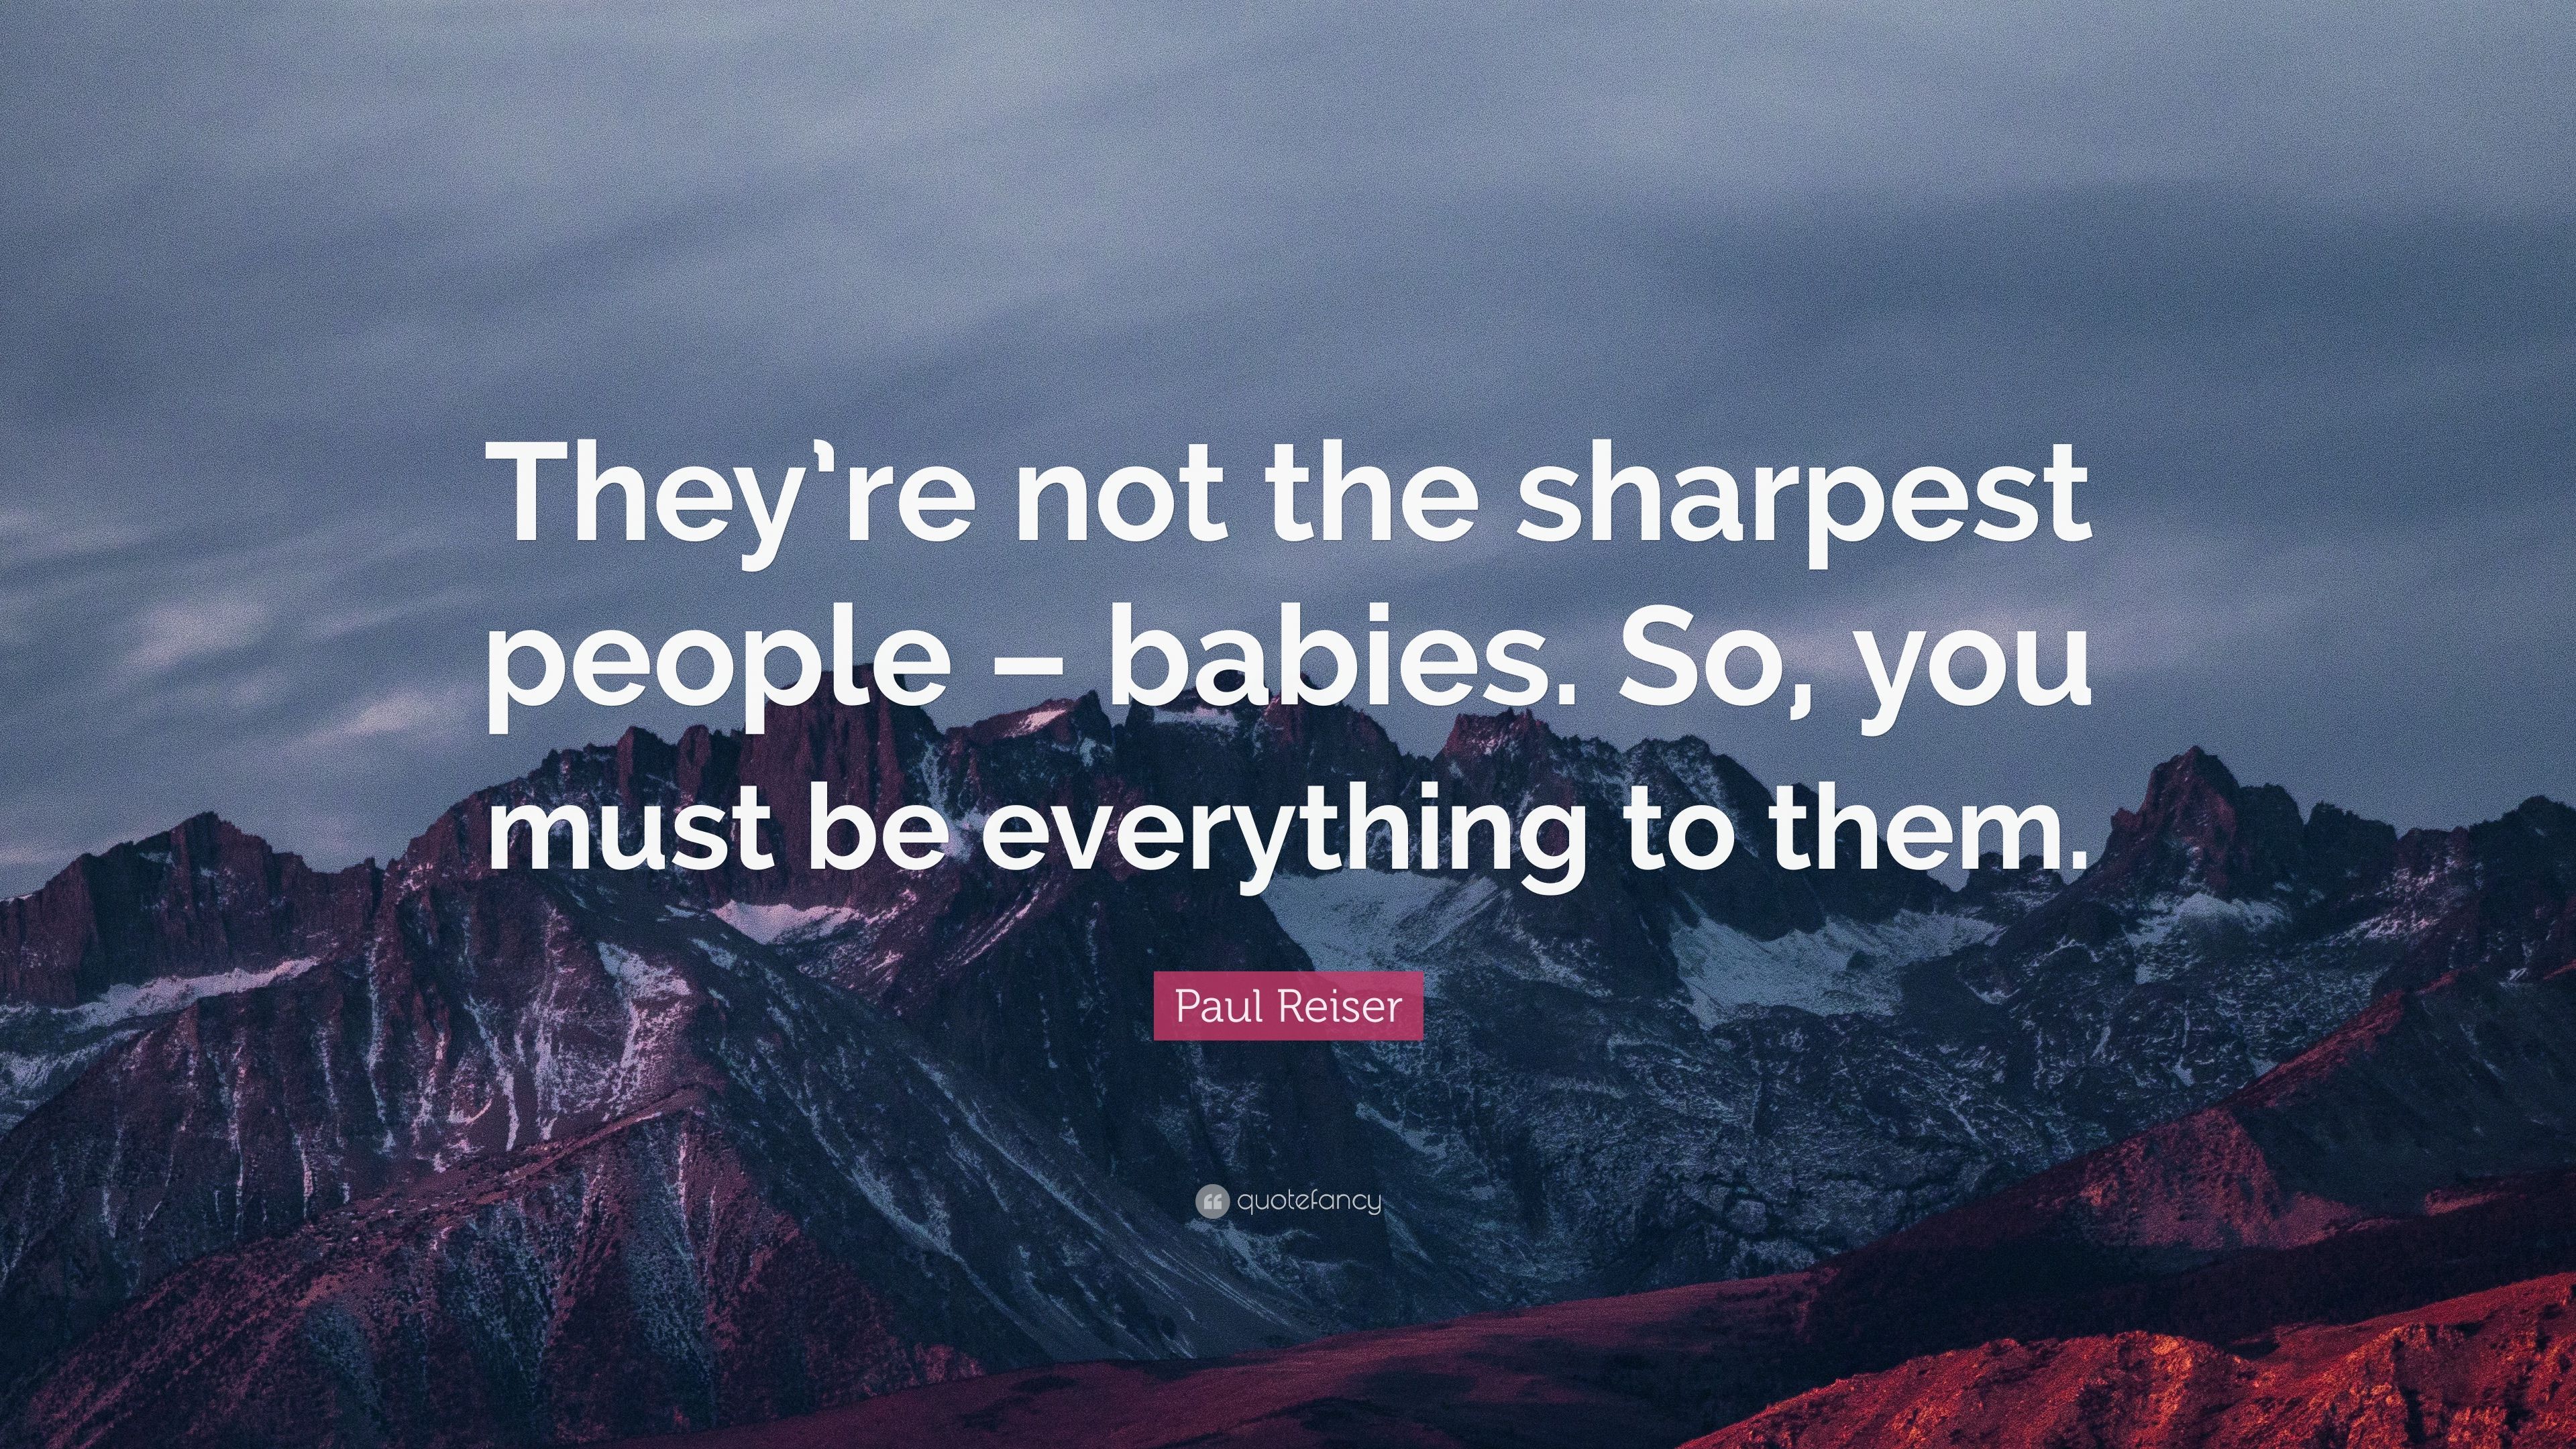 Paul Reiser Quote: “They're not the sharpest people